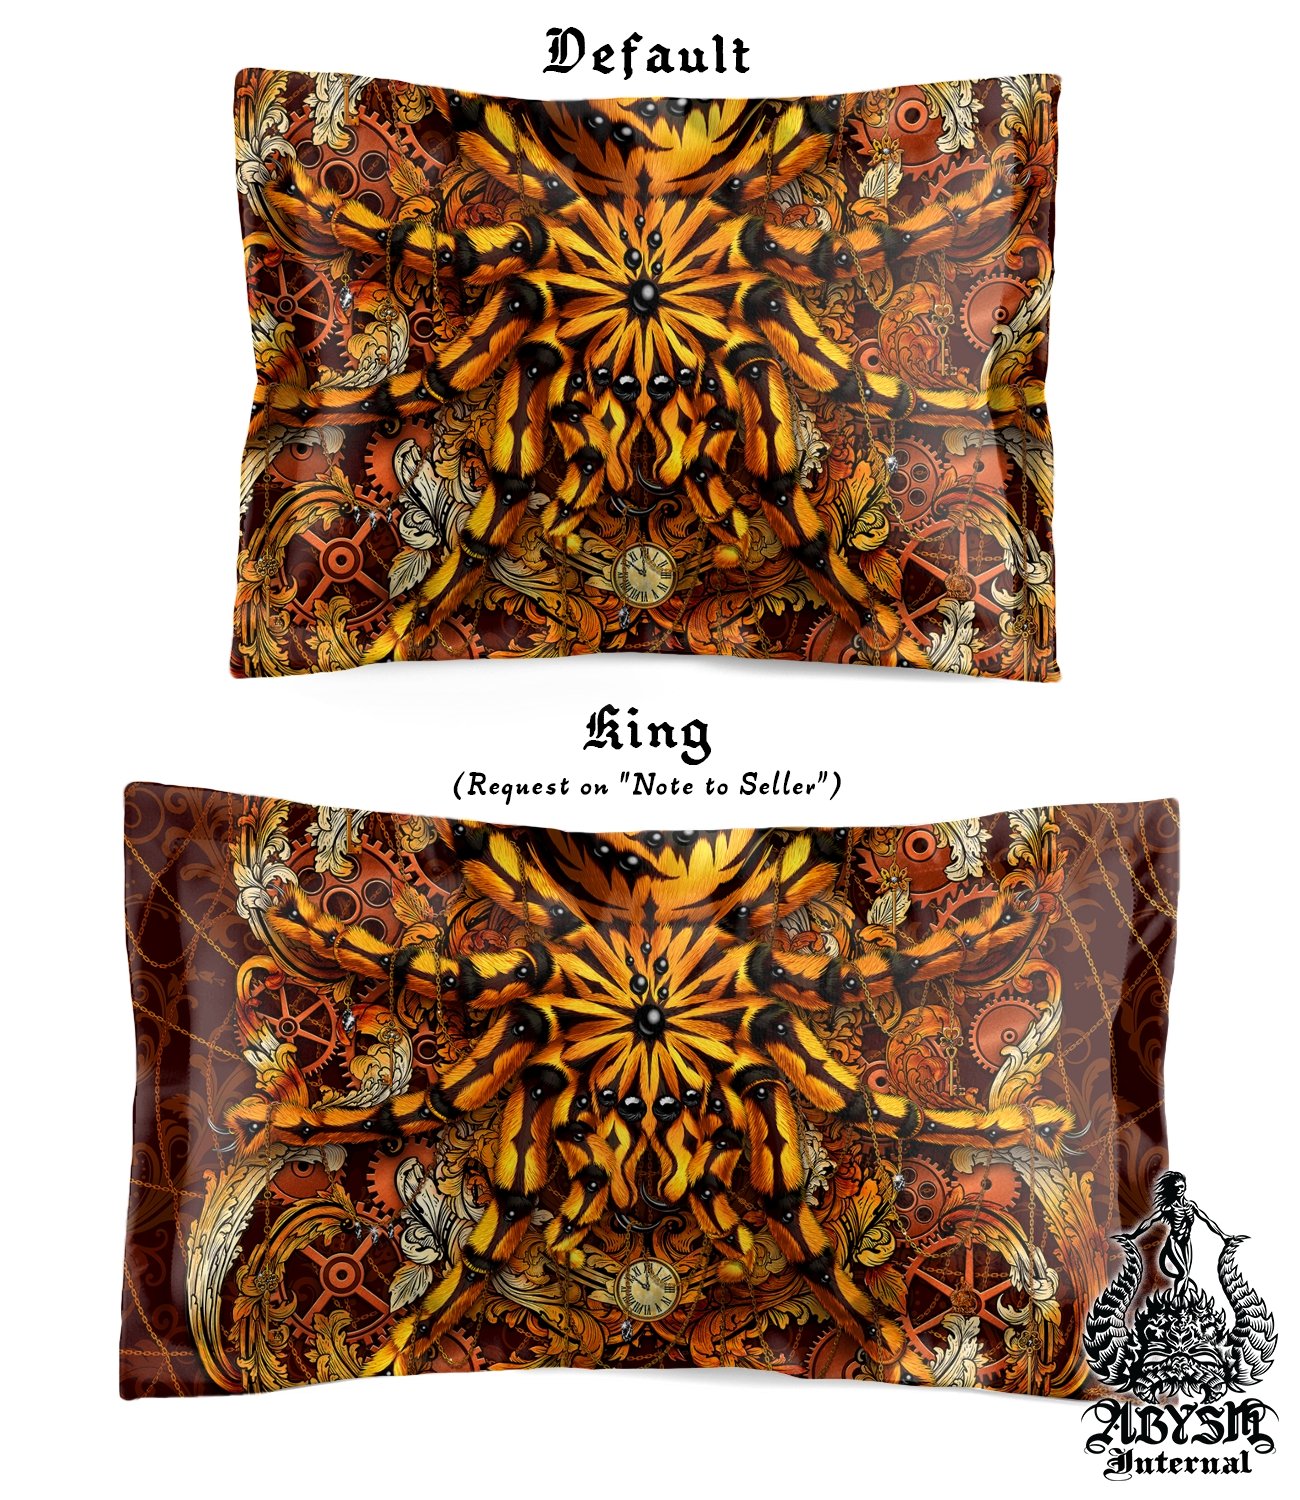 Steampunk Bedding Set, Comforter and Duvet, Bed Cover and Bedroom Decor, King, Queen and Twin Size - Tarantula Spider - Abysm Internal